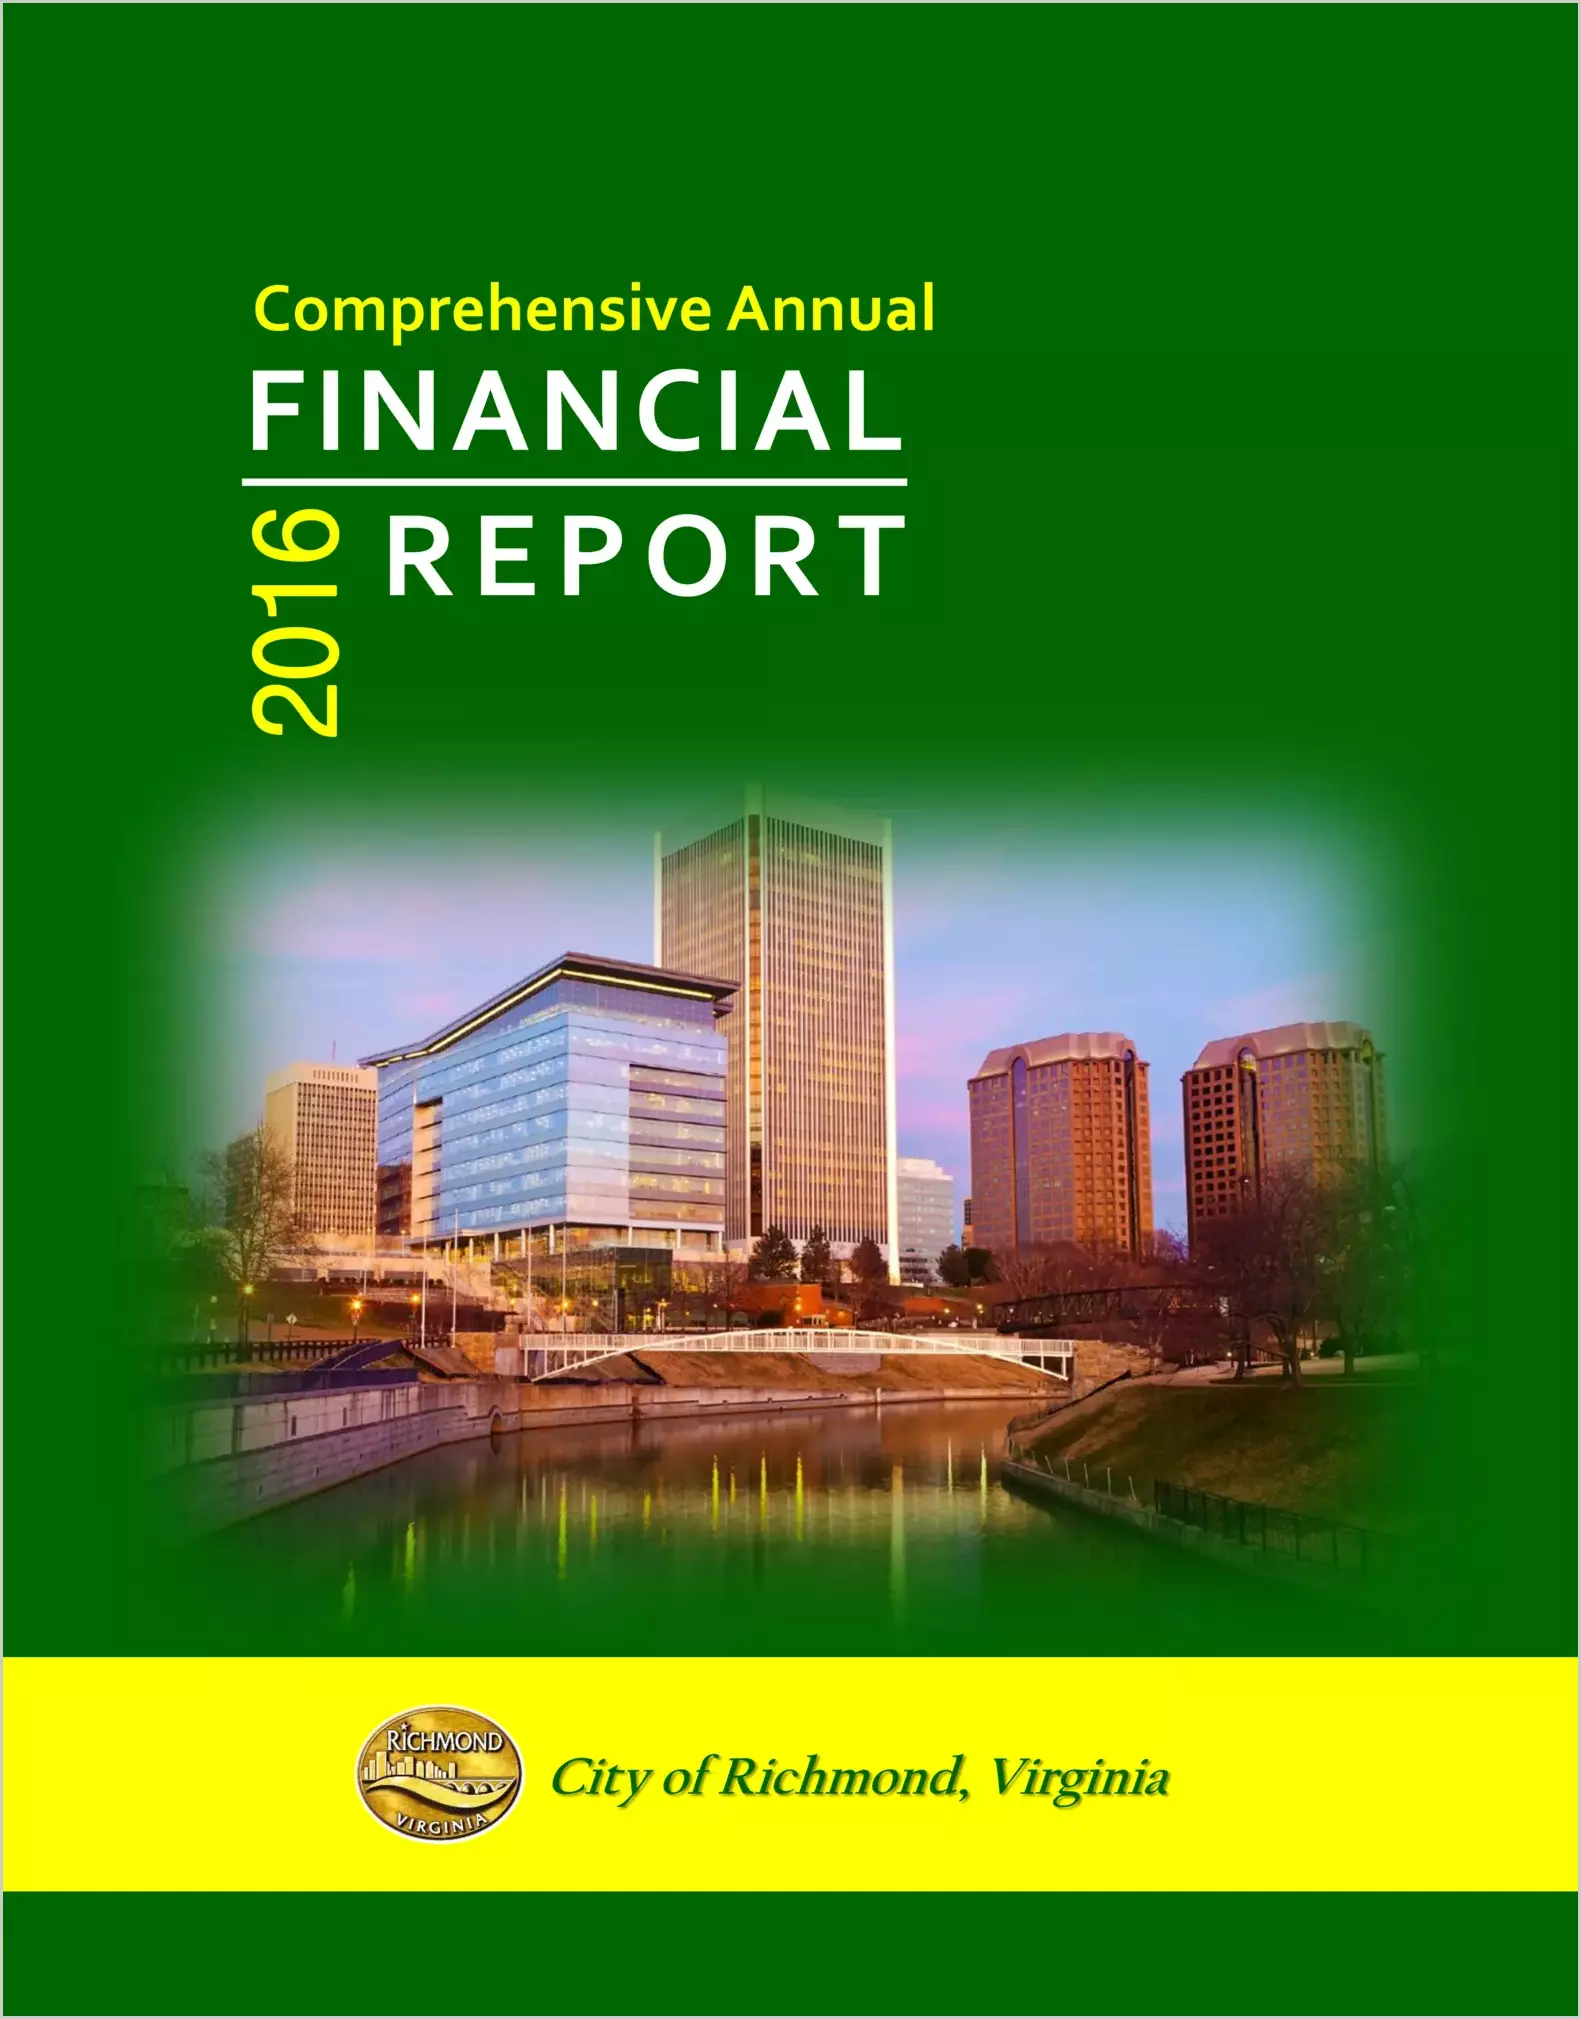 2016 Annual Financial Report for City of Richmond